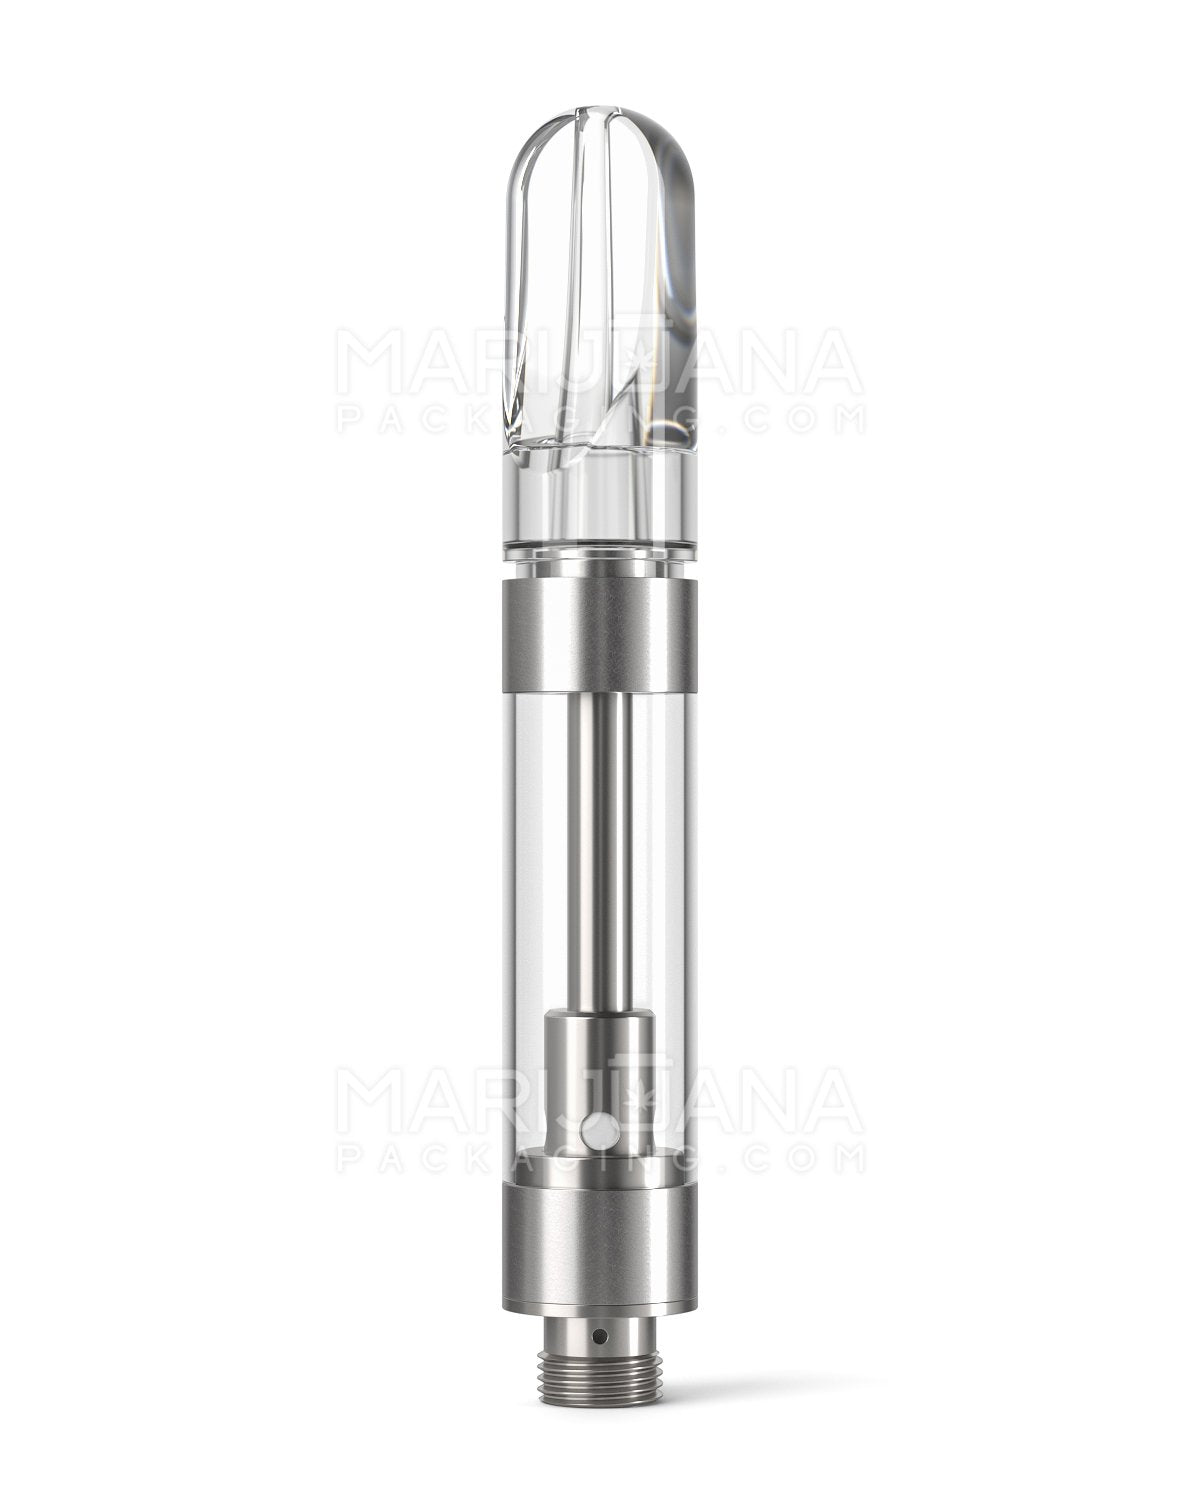 CCELL | Liquid6 Reactor Plastic Cartridge with Clear Plastic Mouthpiece | 1mL - Press On | Sample - 1